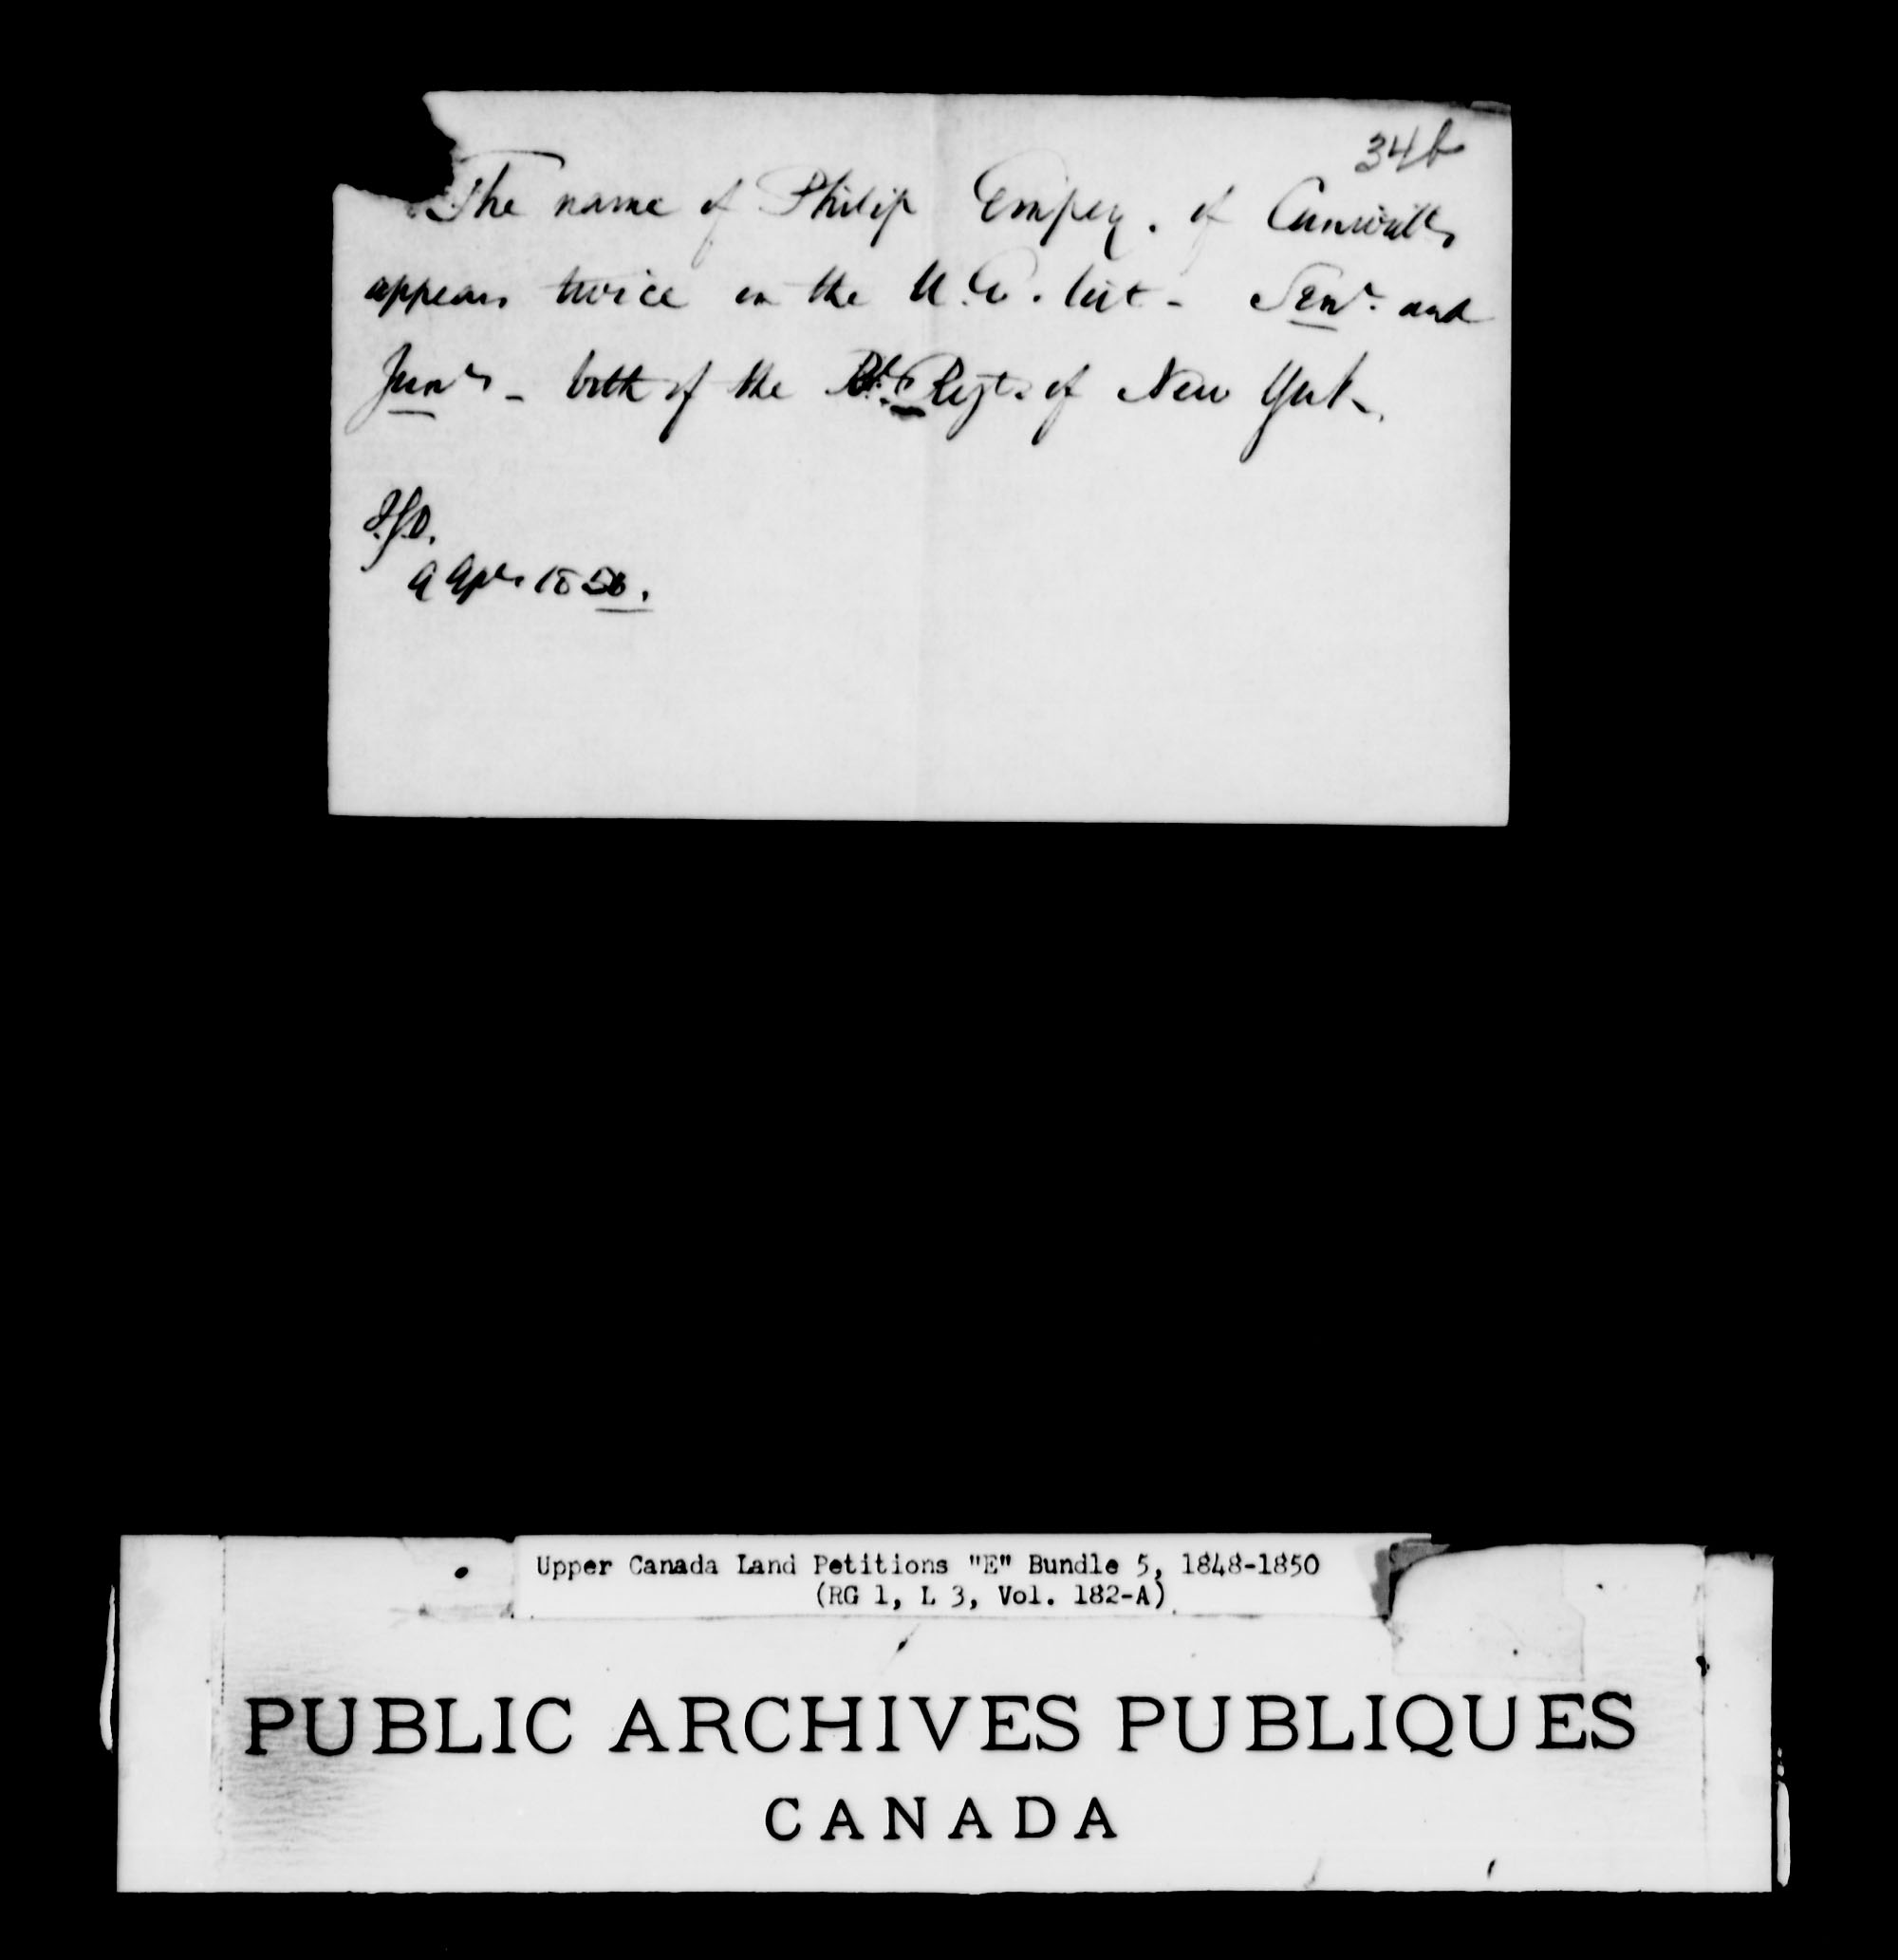 Title: Upper Canada Land Petitions (1763-1865) - Mikan Number: 205131 - Microform: c-1892